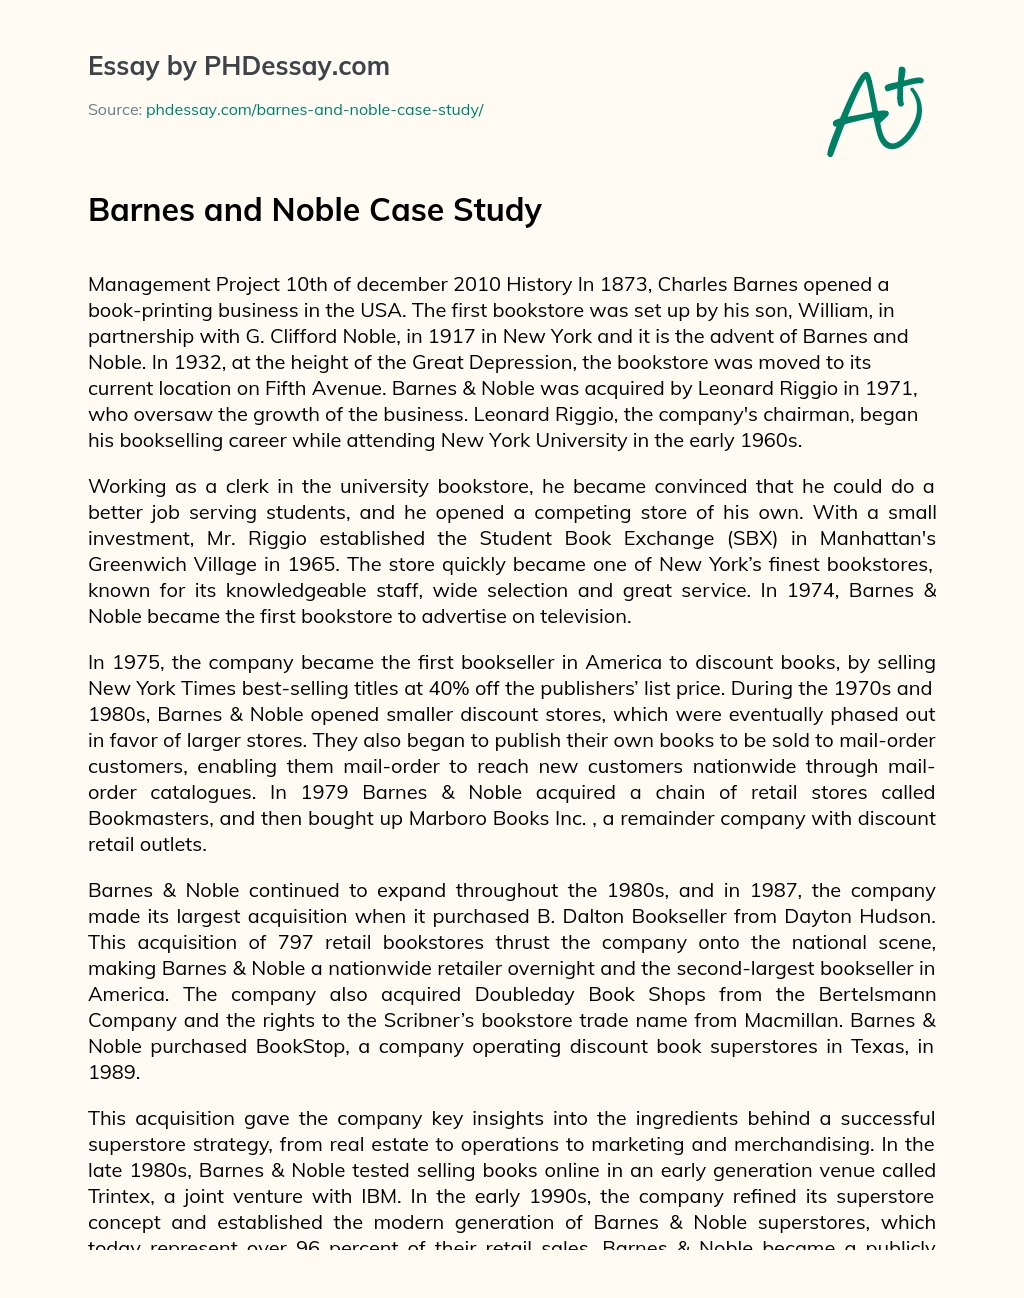 Barnes and Noble Case Study essay